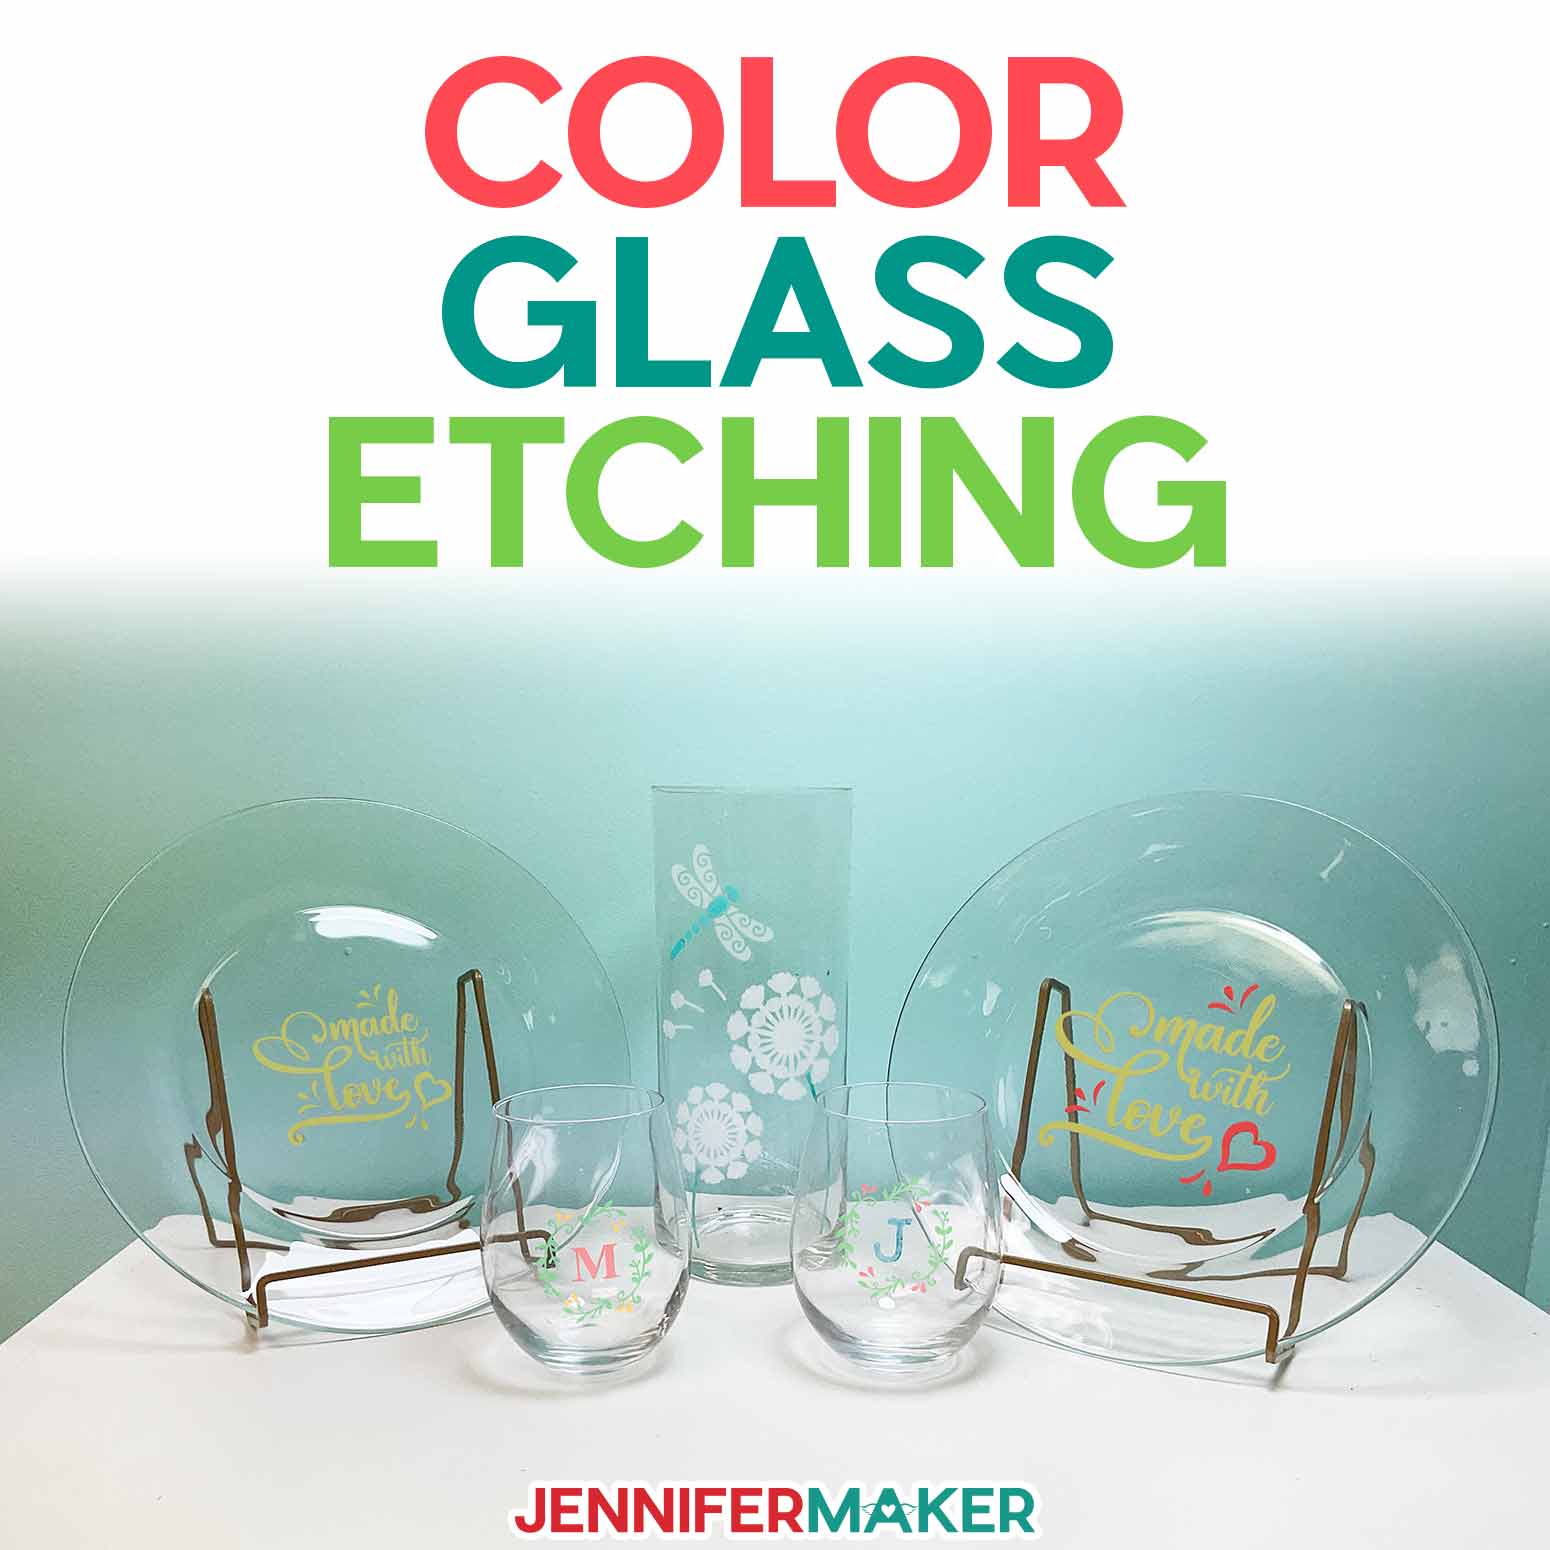 Clear glass plates, wine glasses, and a vase displayed to show various colors added to the designs under the words Color Glass Etching.